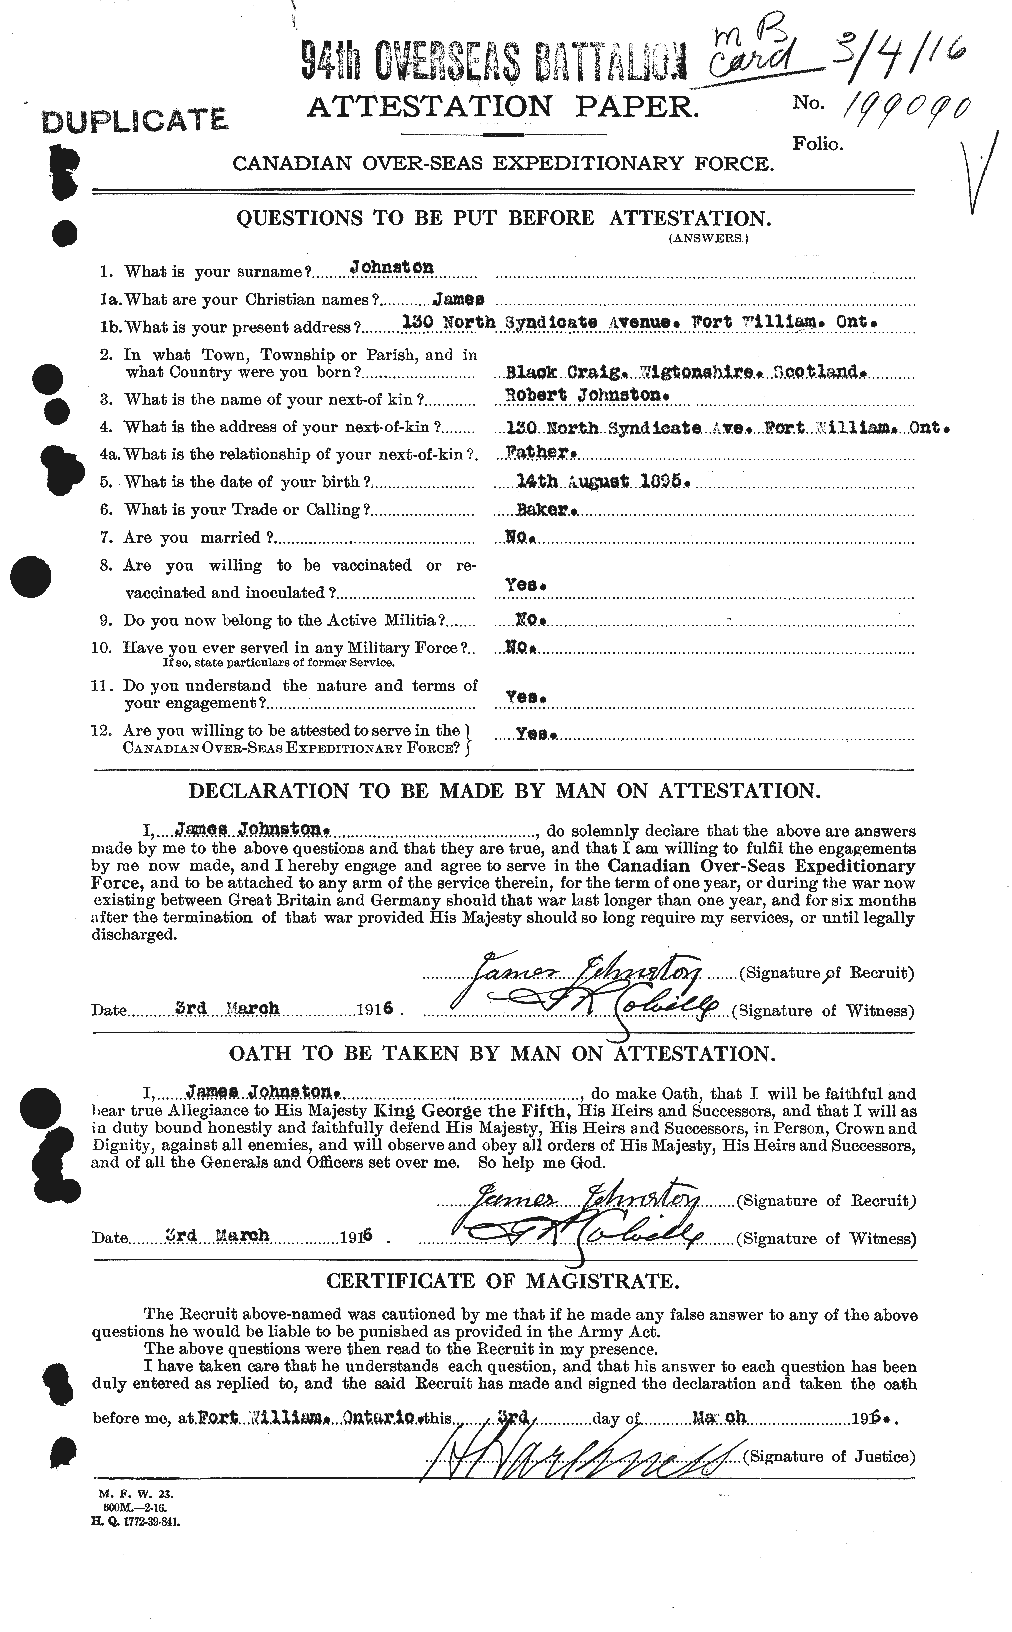 Personnel Records of the First World War - CEF 422702a